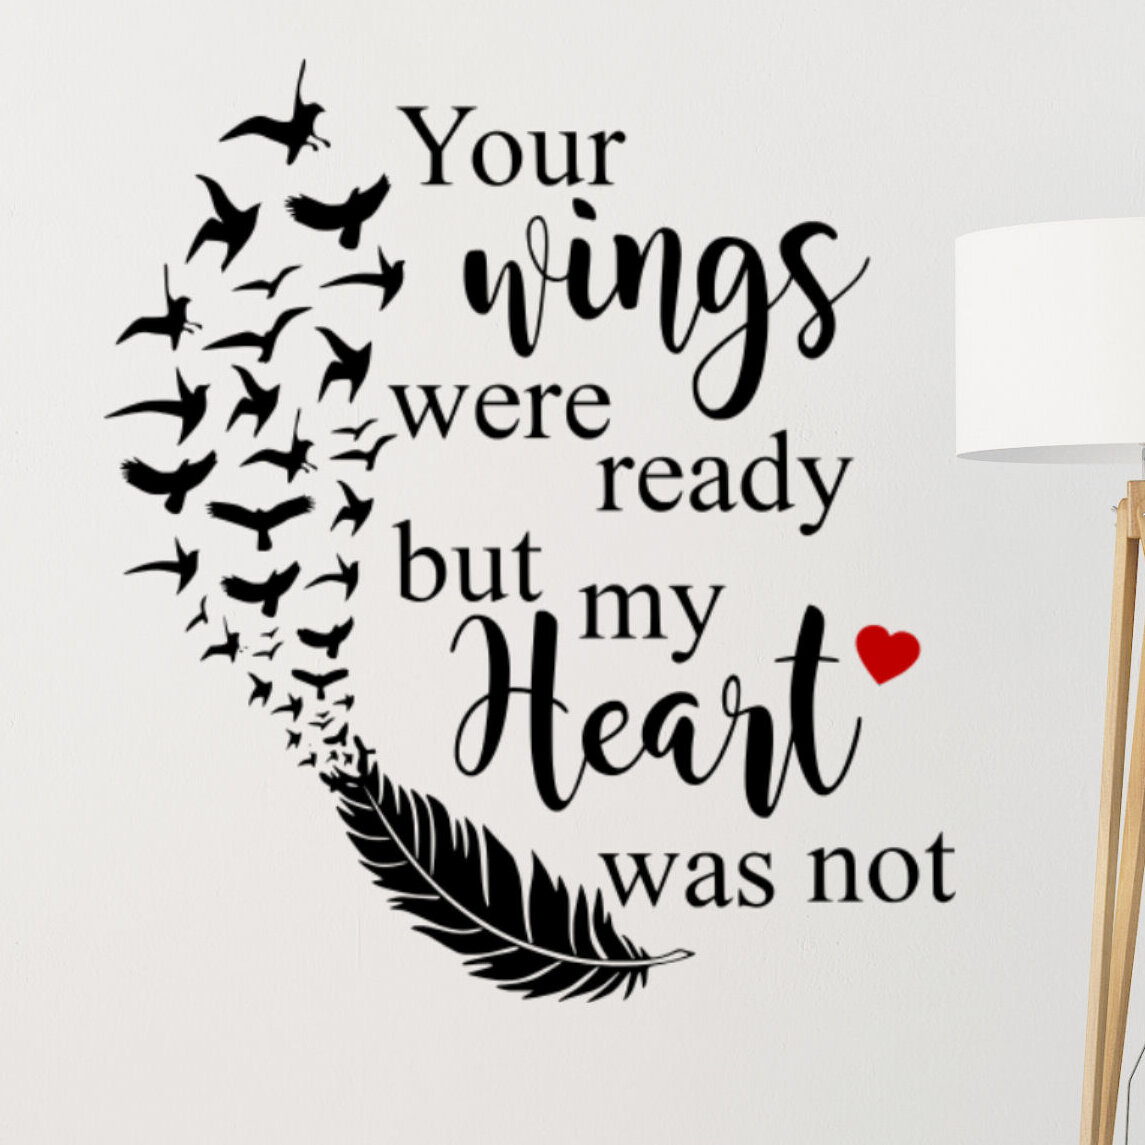 Star Bottle LED Light Up Your wings were ready but my Heart was not bottle Decal 